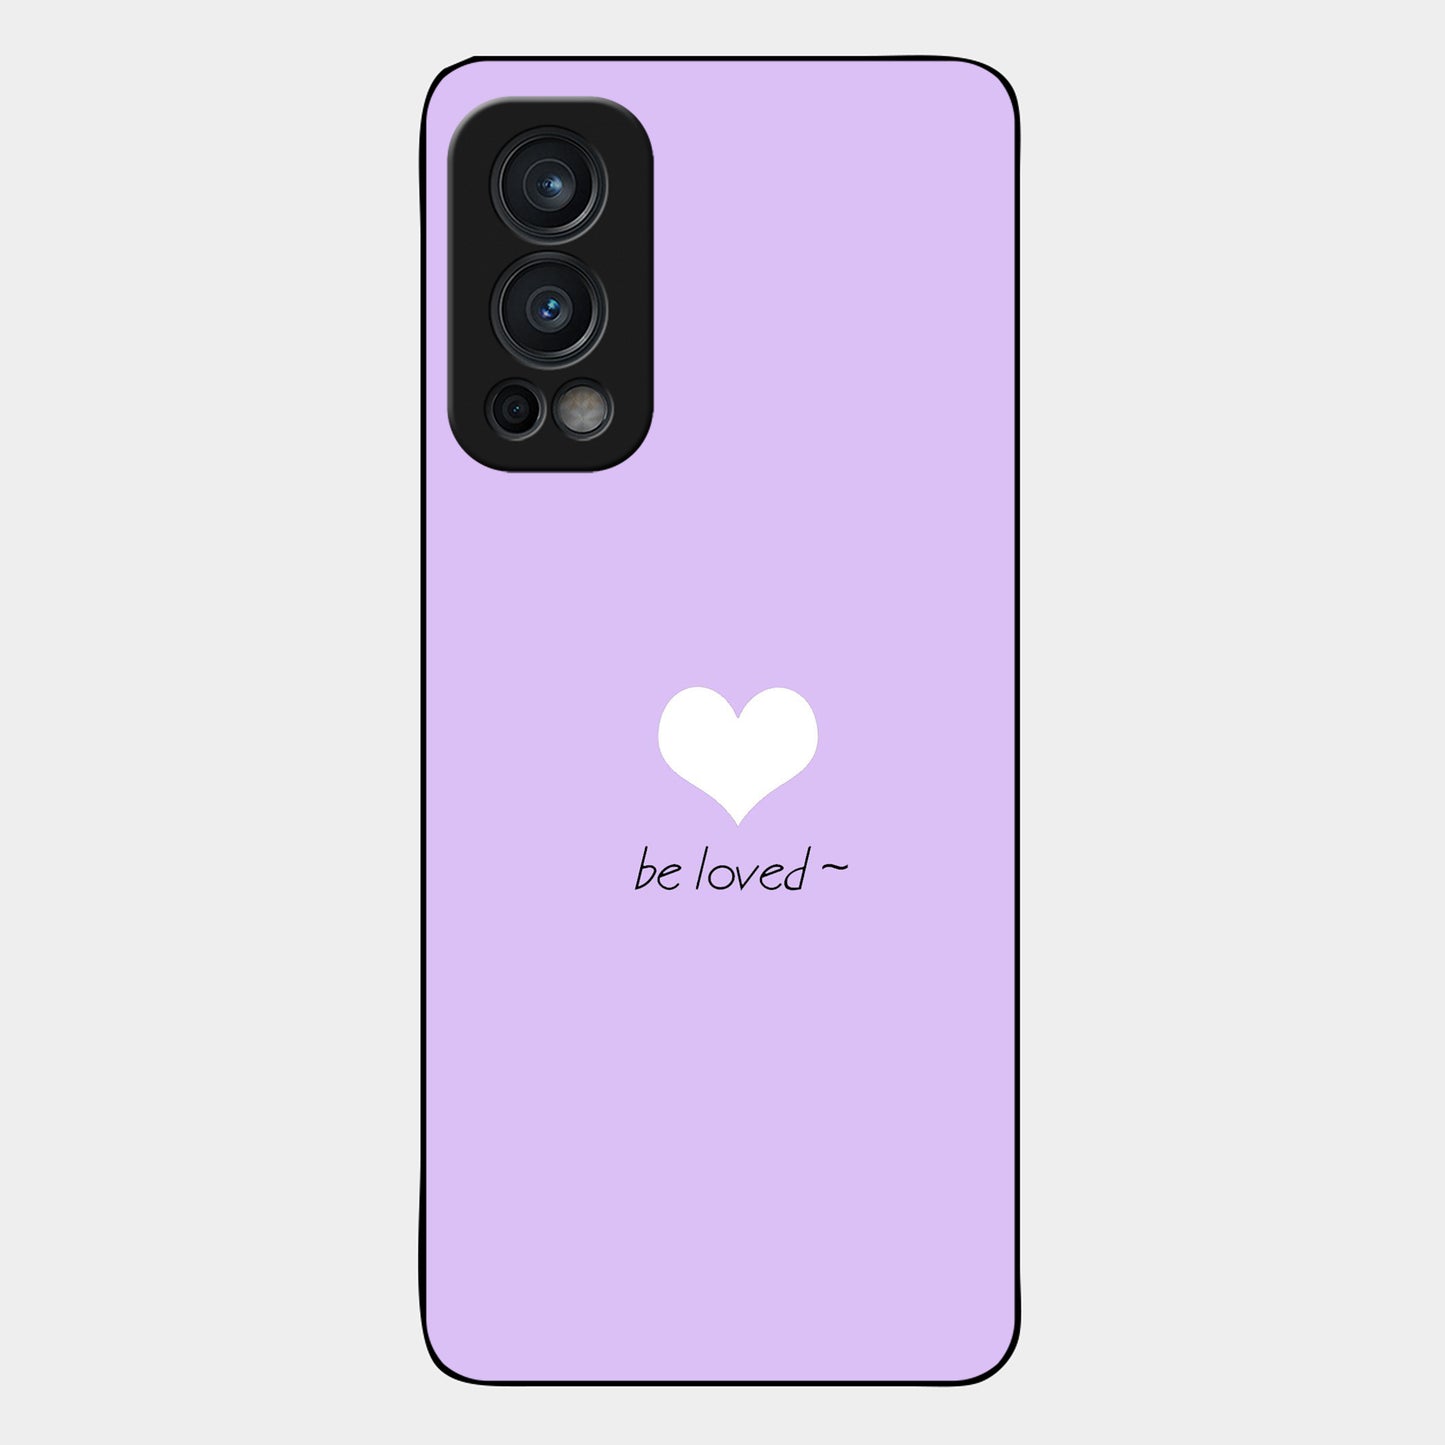 Be loved Glossy Metal Case Cover For OnePlus